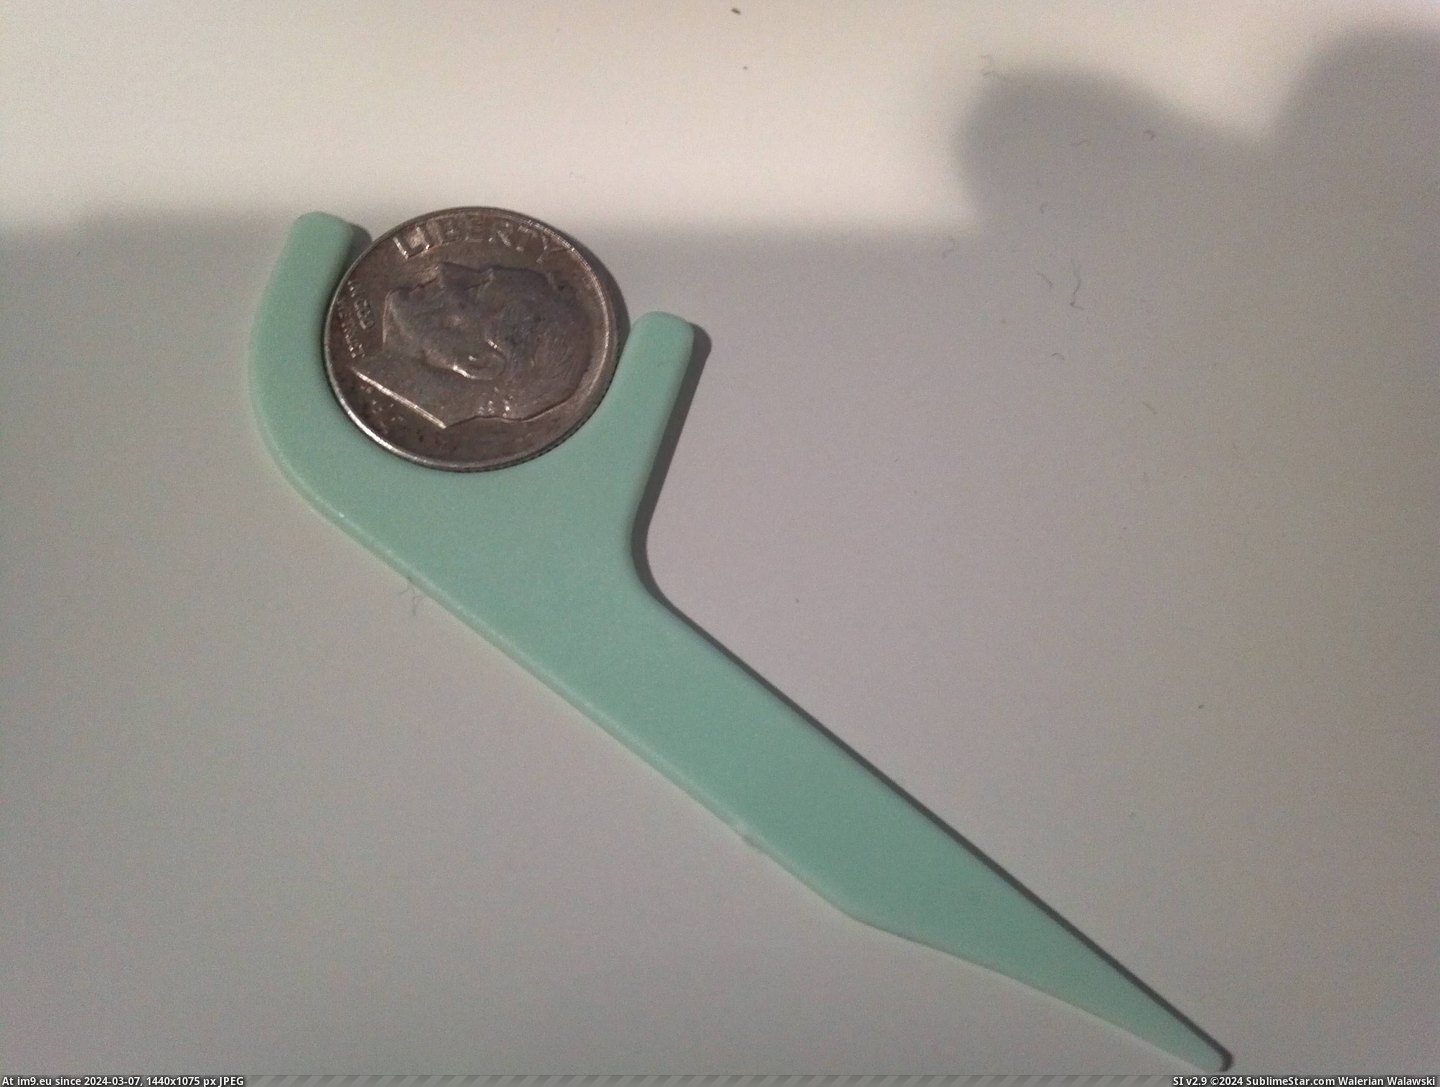 #Pick #Perfectly #Dime #Floss #Curvature #Fits #Dental [Mildlyinteresting] A dime fits perfectly in the curvature of this dental floss pick Pic. (Image of album My r/MILDLYINTERESTING favs))